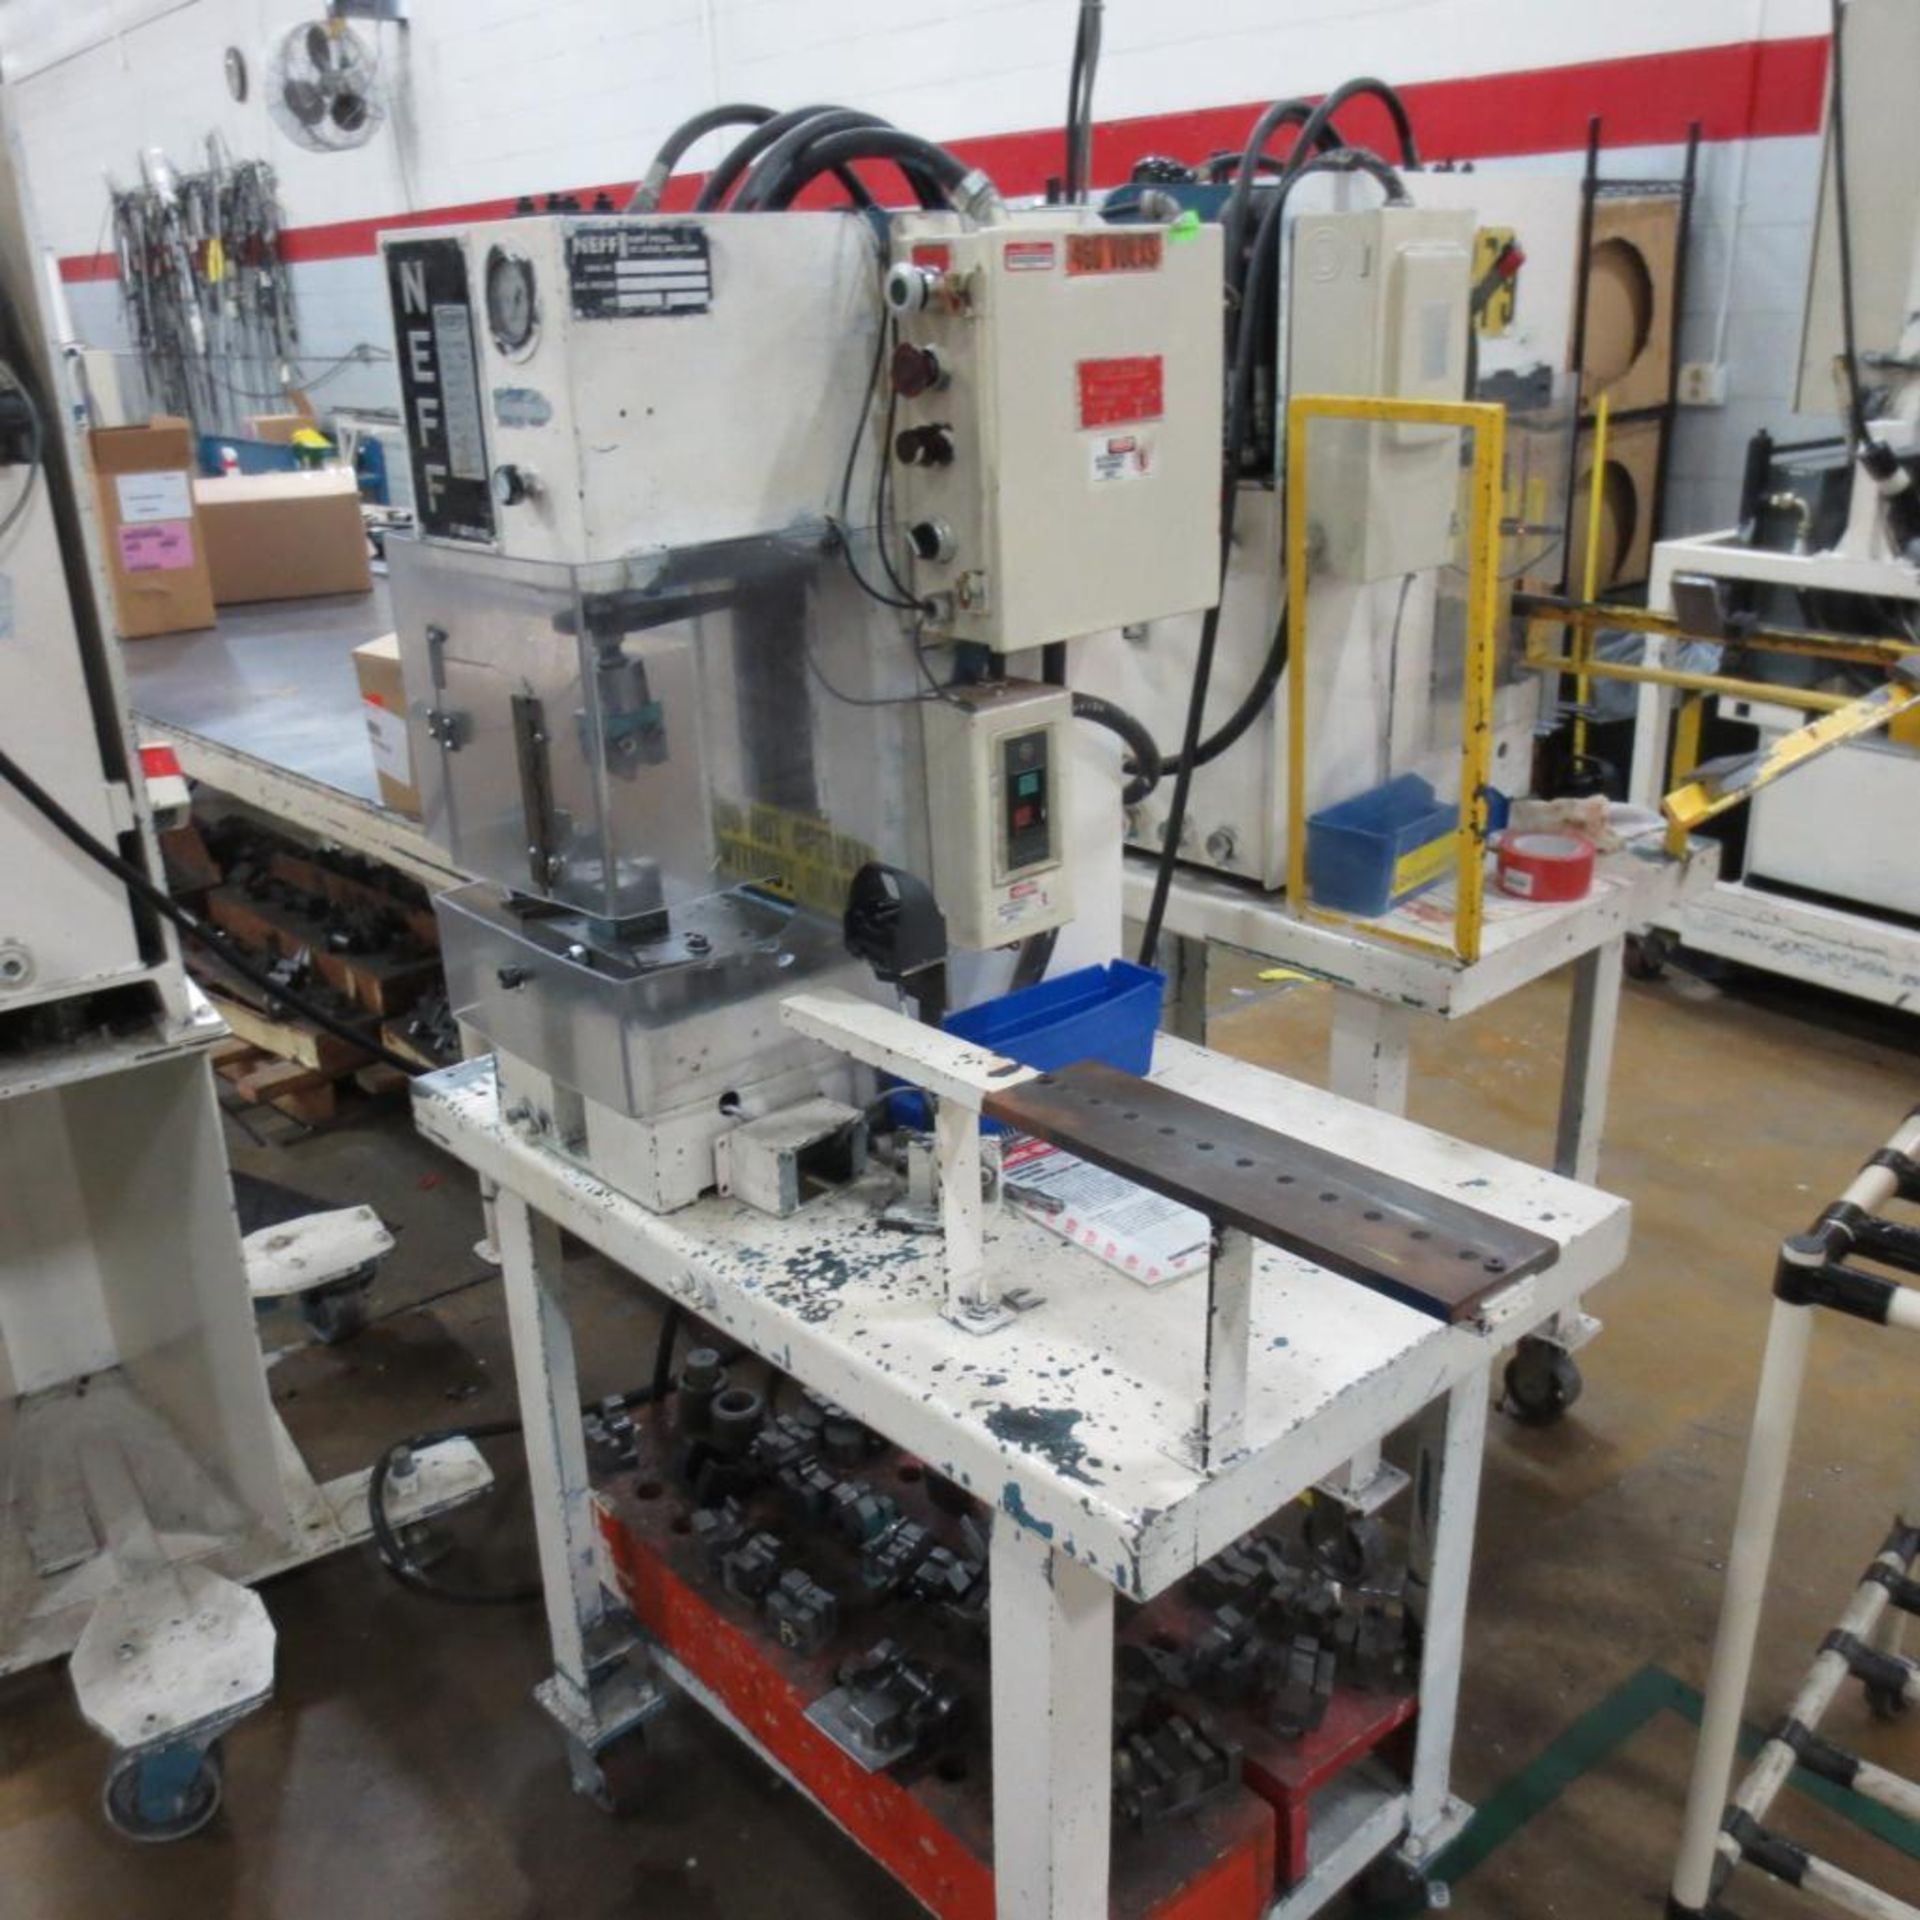 3 Button Extruder, Lorik Model 99068 Bender, Fitting Machine, Table, File Cabinet, 2 Neff 2 Ton Pres - Image 5 of 11